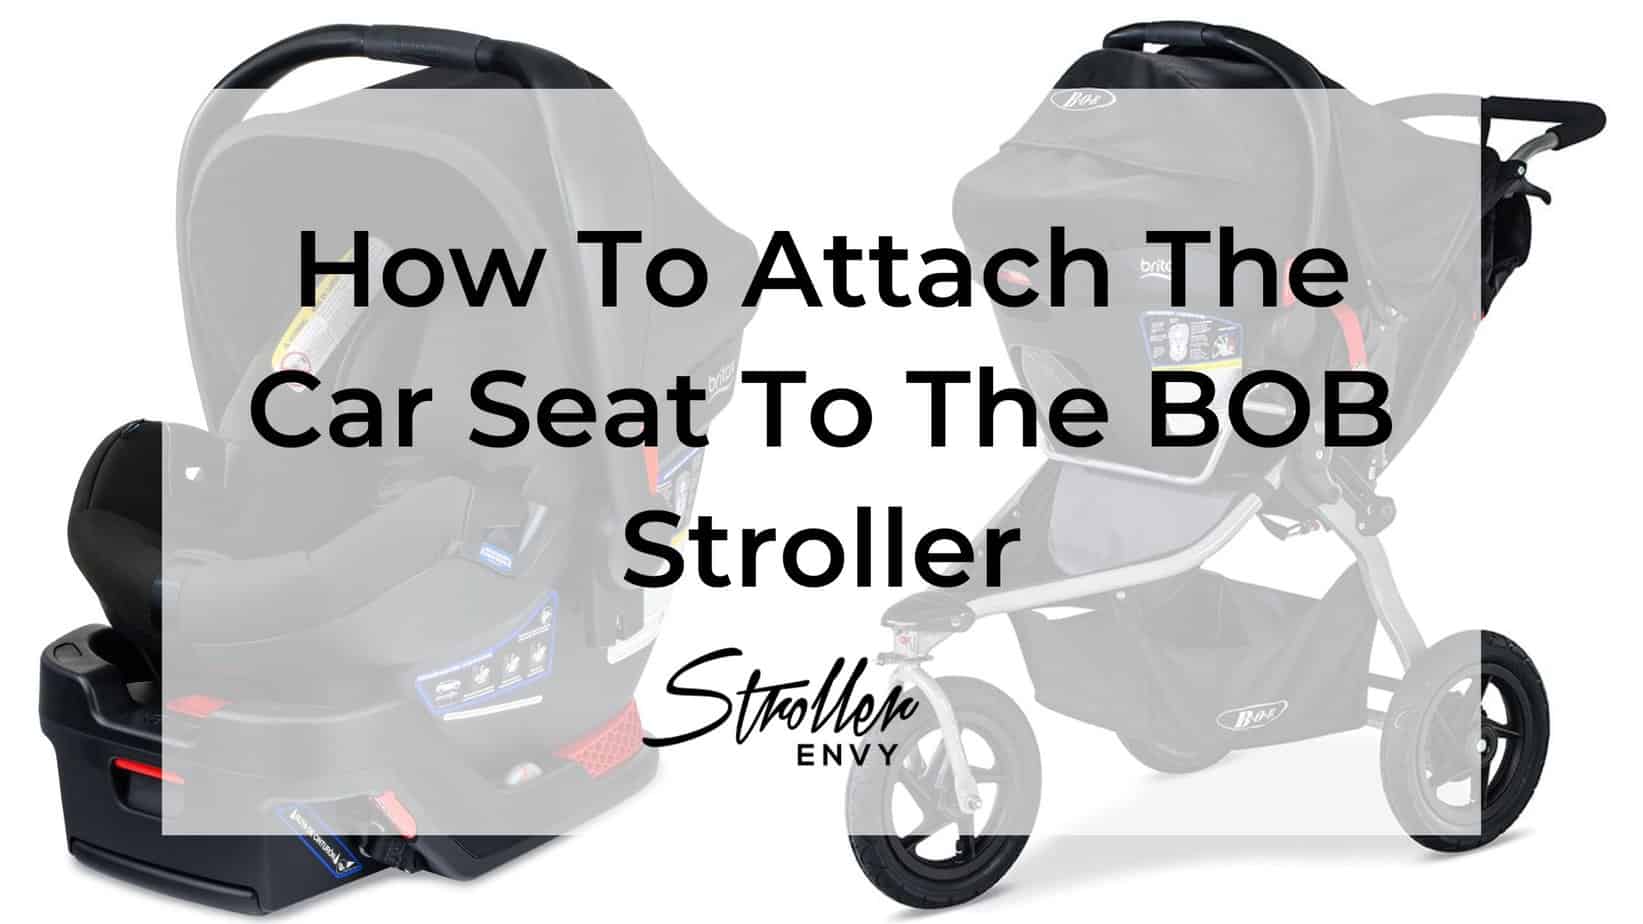 How To Attach The Car Seat To The BOB Stroller